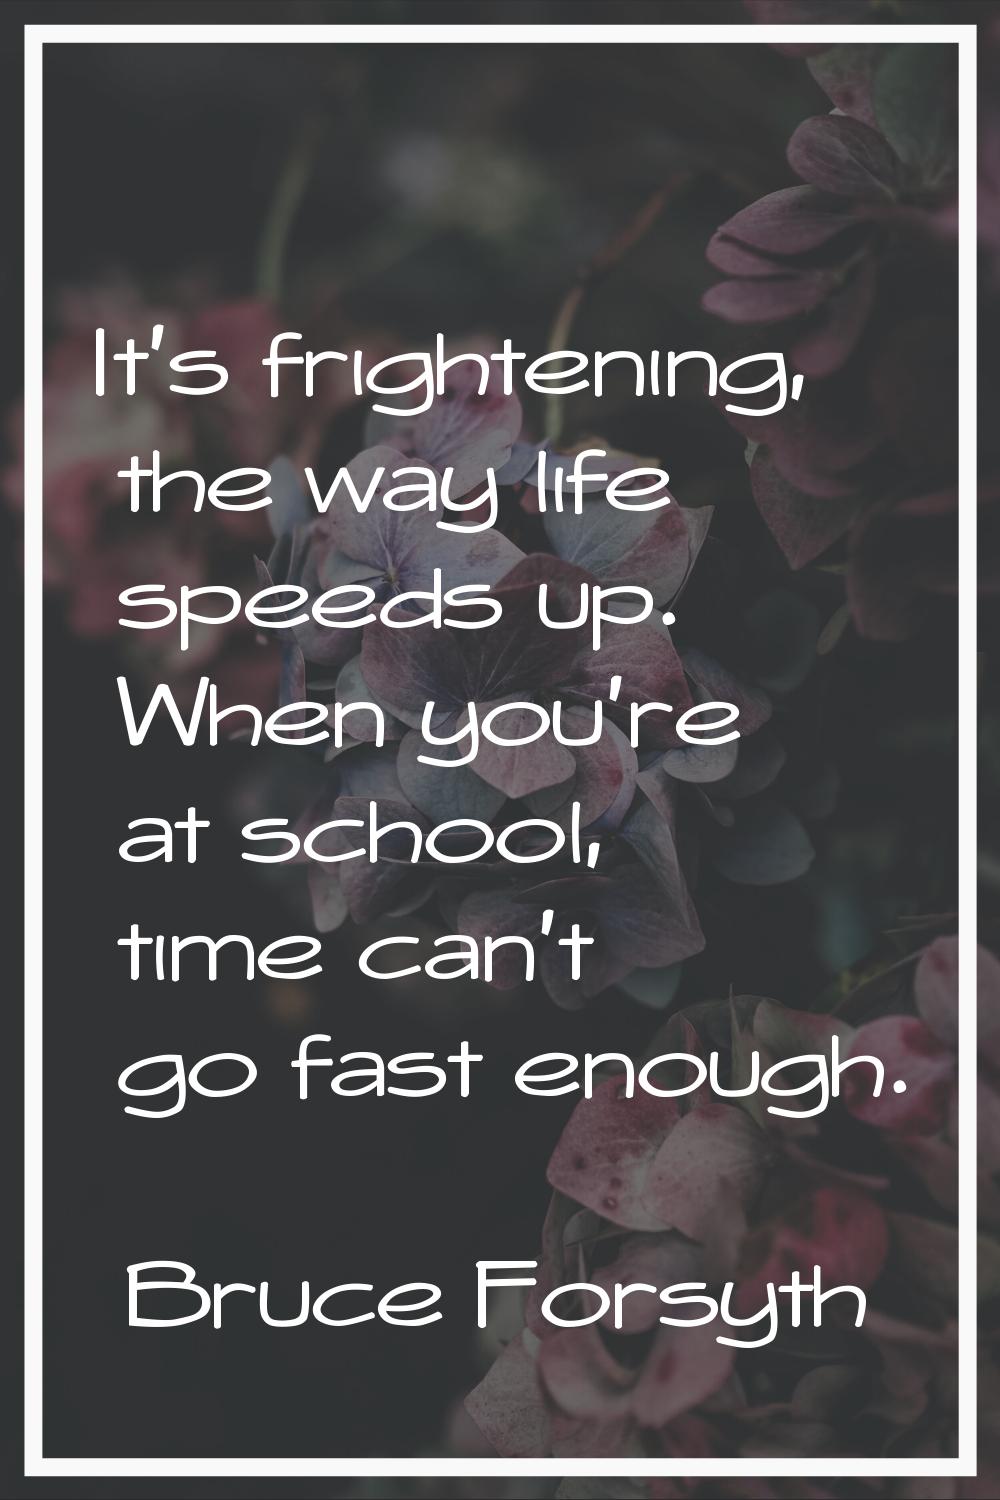 It's frightening, the way life speeds up. When you're at school, time can't go fast enough.